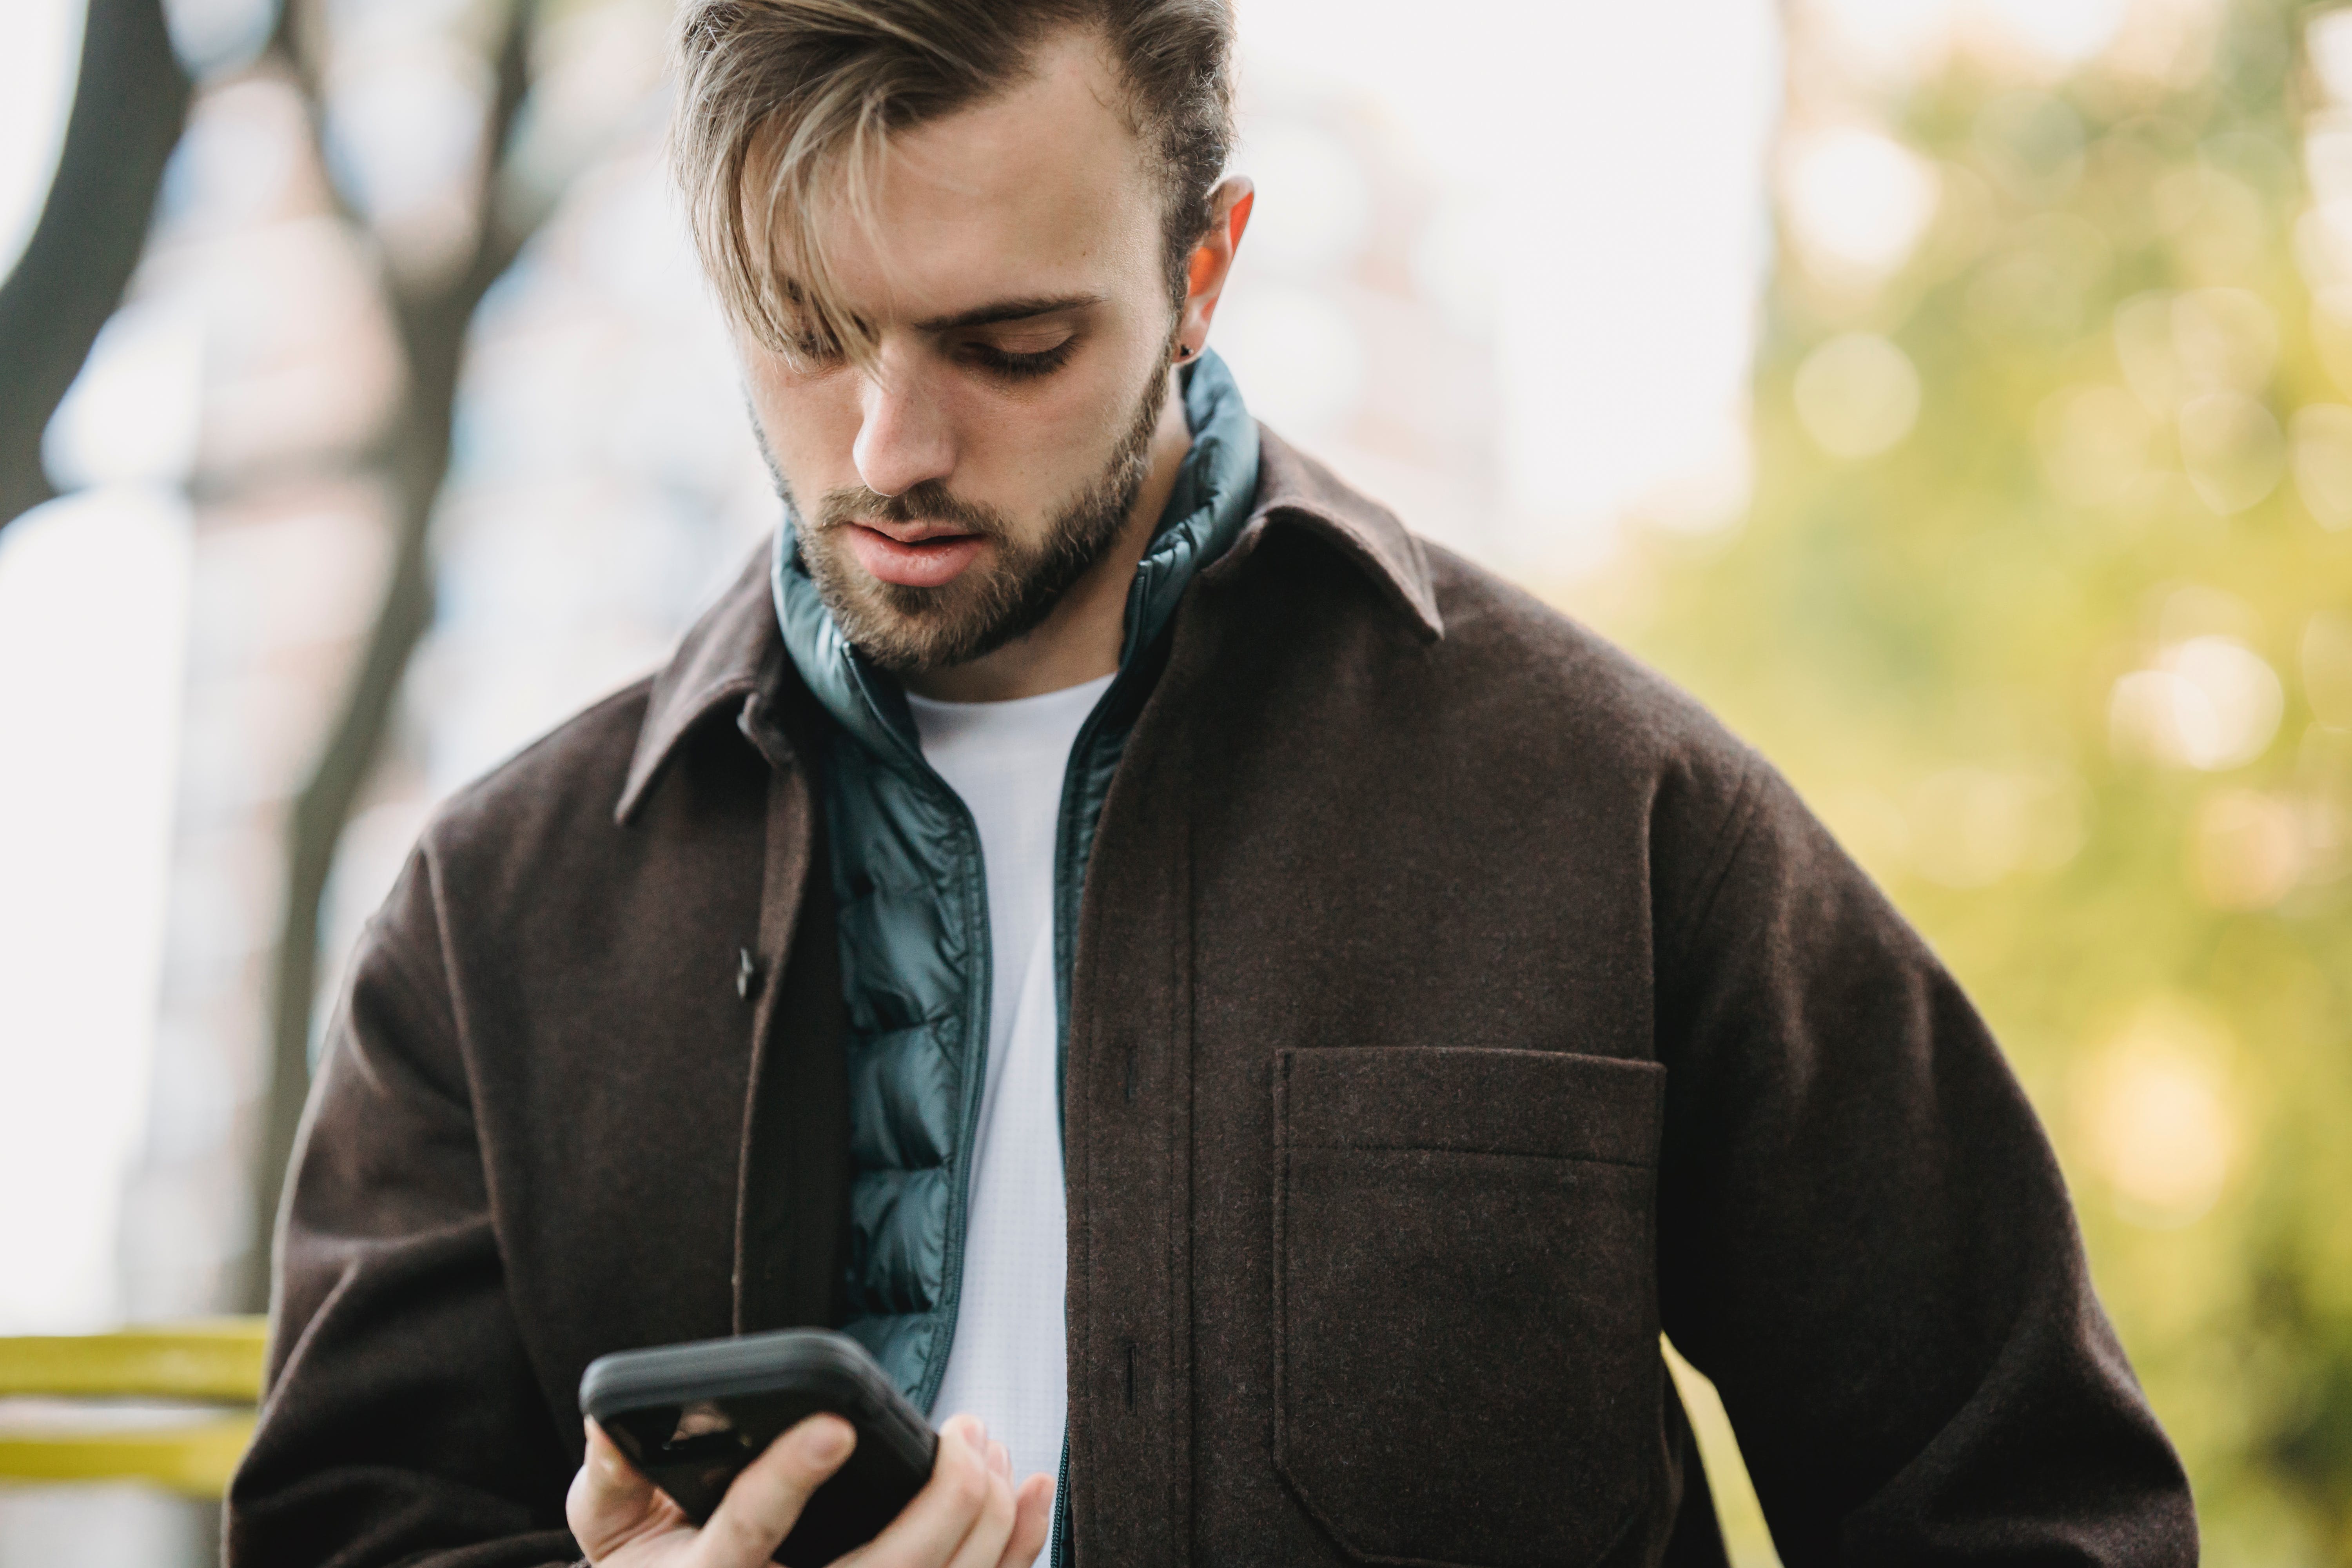 A man looking down at his cell phone while outside | Source: Pexels